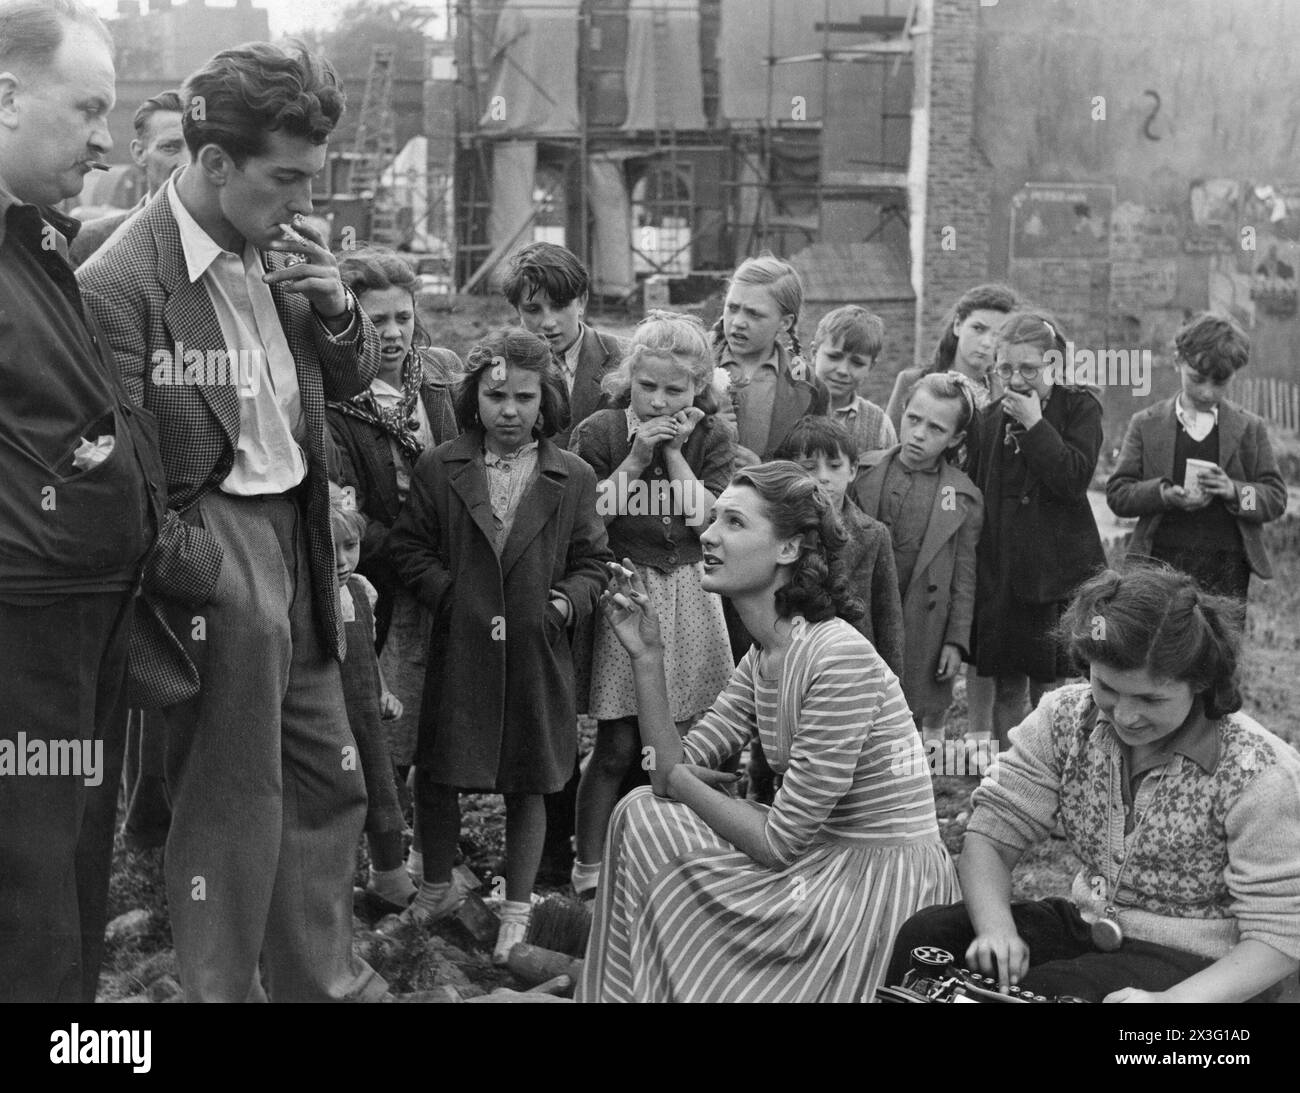 British Actress BARBARA MURRAY chatting with BERNARD FARREL  surrounded by local children during the making of the EALING  comedy PASSPORT TO PIMLICO 1949 filmed on location in a large bombsite in Lambeth Director HENRY CORNELIUS Screenplay T.E.B. CLARKE Music GEORGES AURIC Ealing Studios Stock Photo